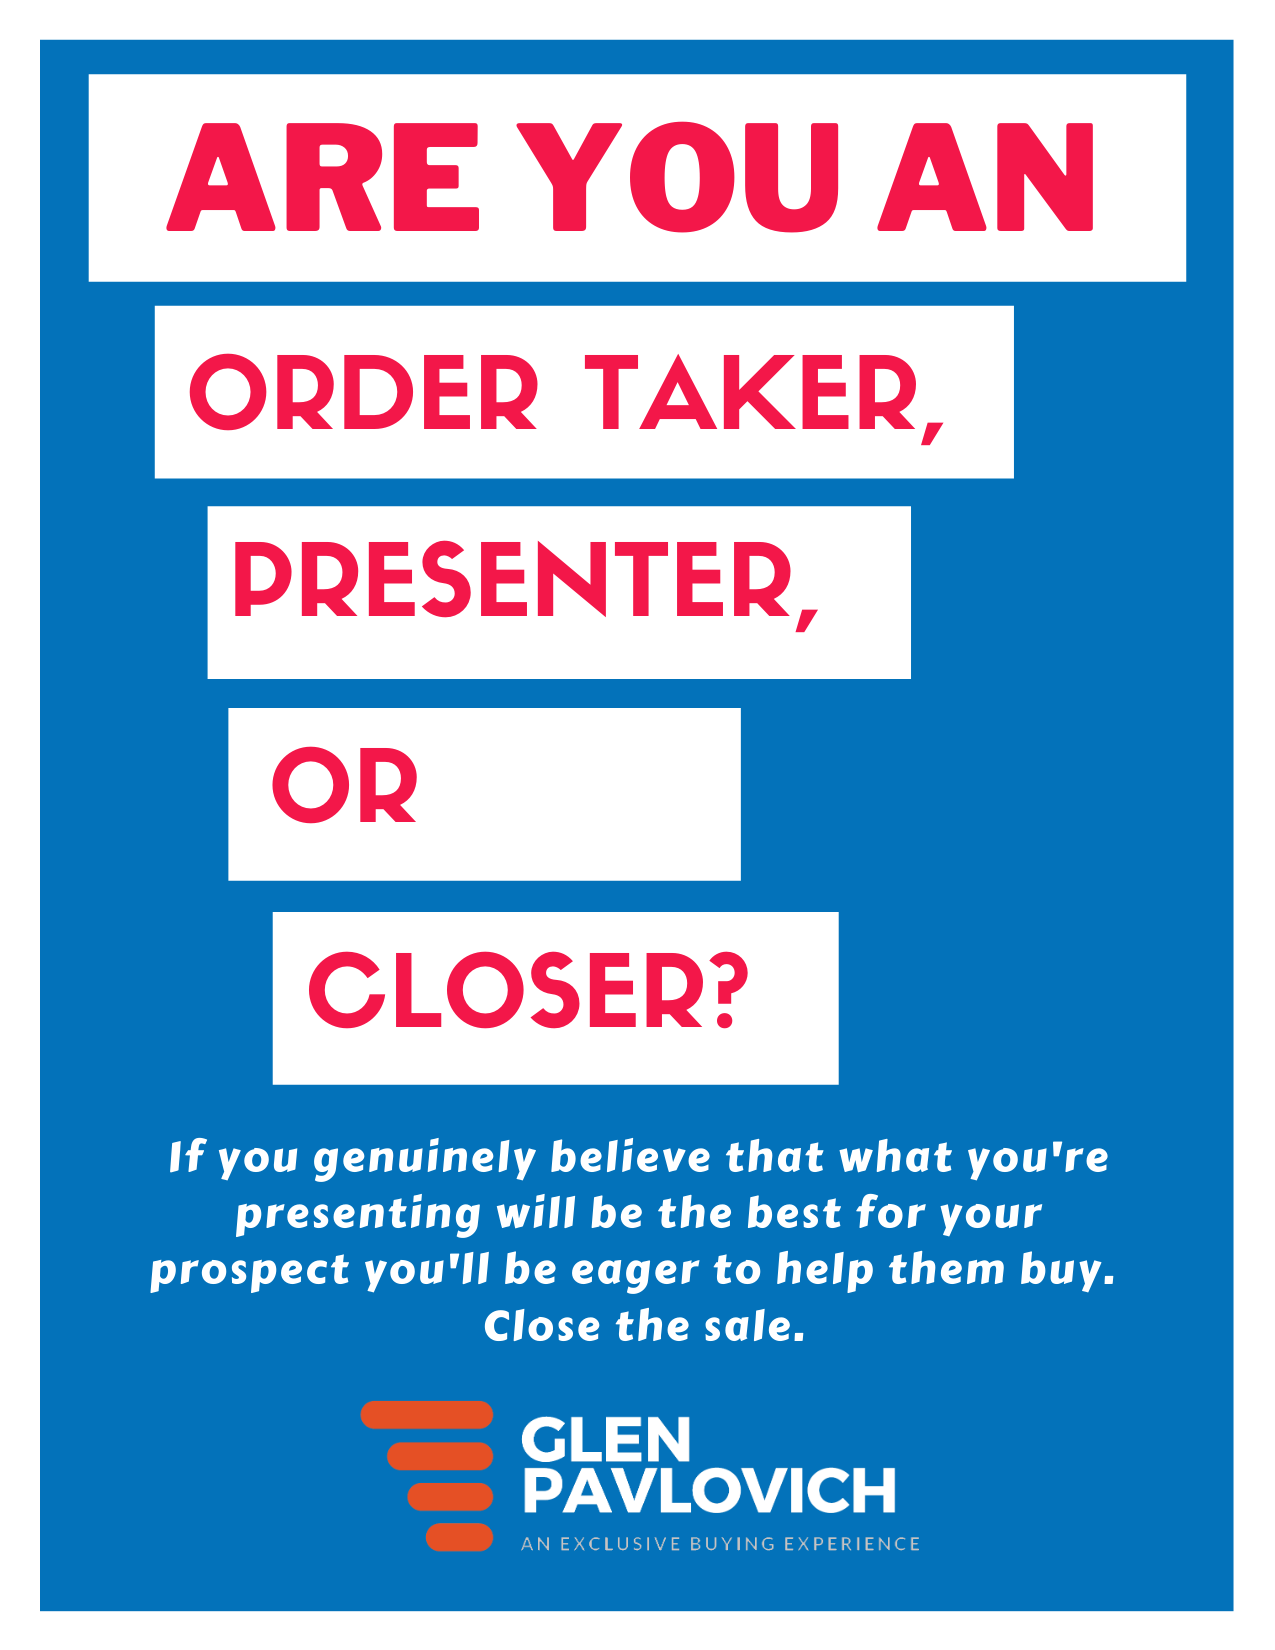 Are you an Order Taker, Presenter or Closer?